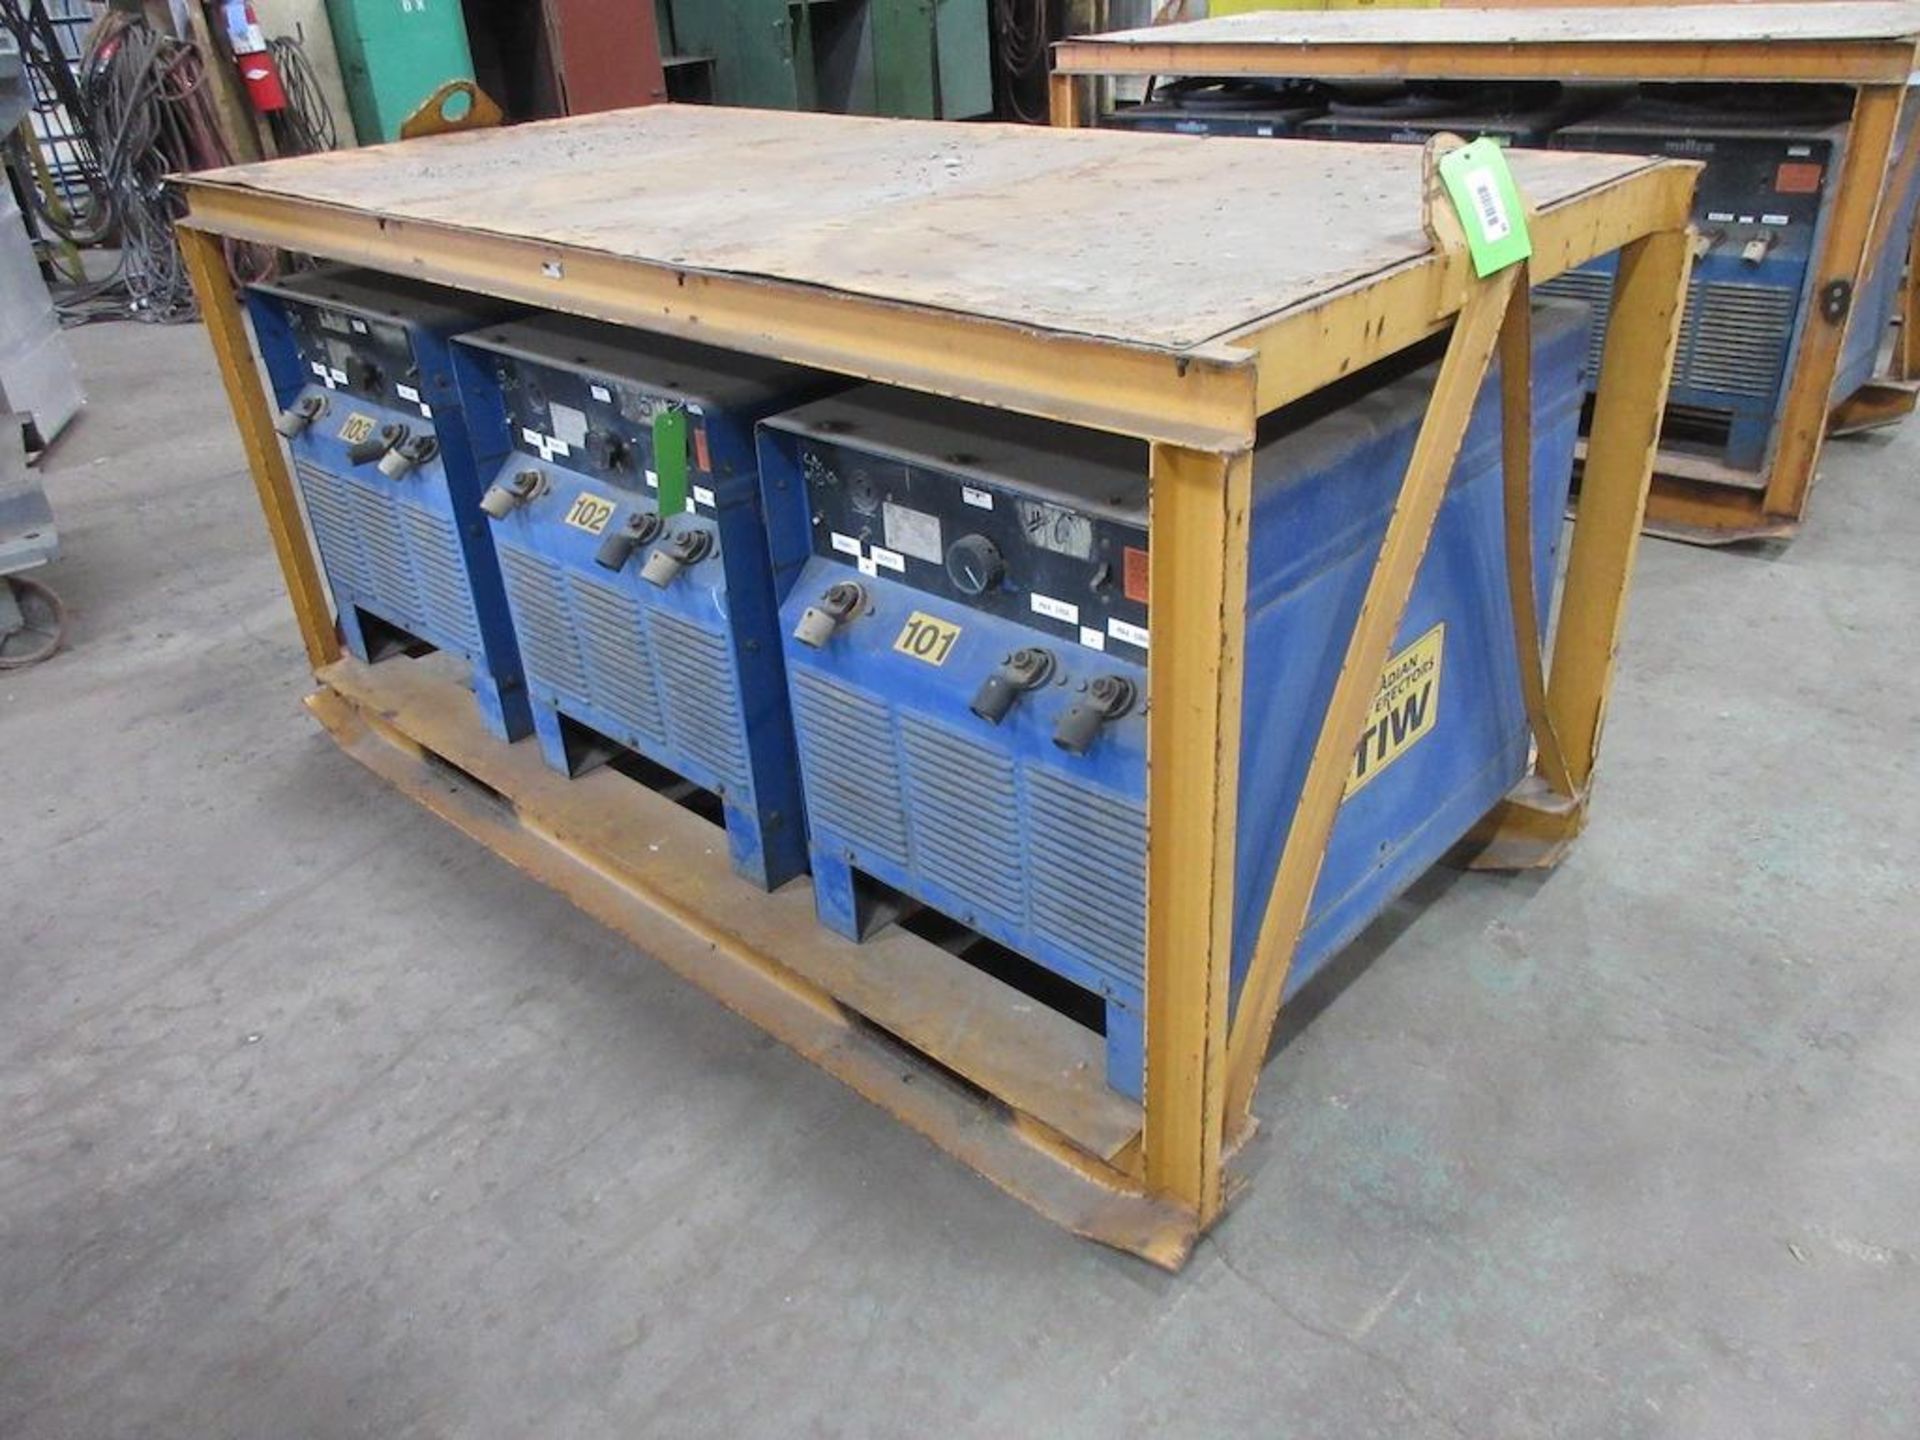 (3) SET OF MILLER WELDING POWER SOURCES, ALL 3 BOLTED TO STEEL SKID FRAME MEASURING: 82"W X 40"D X 4